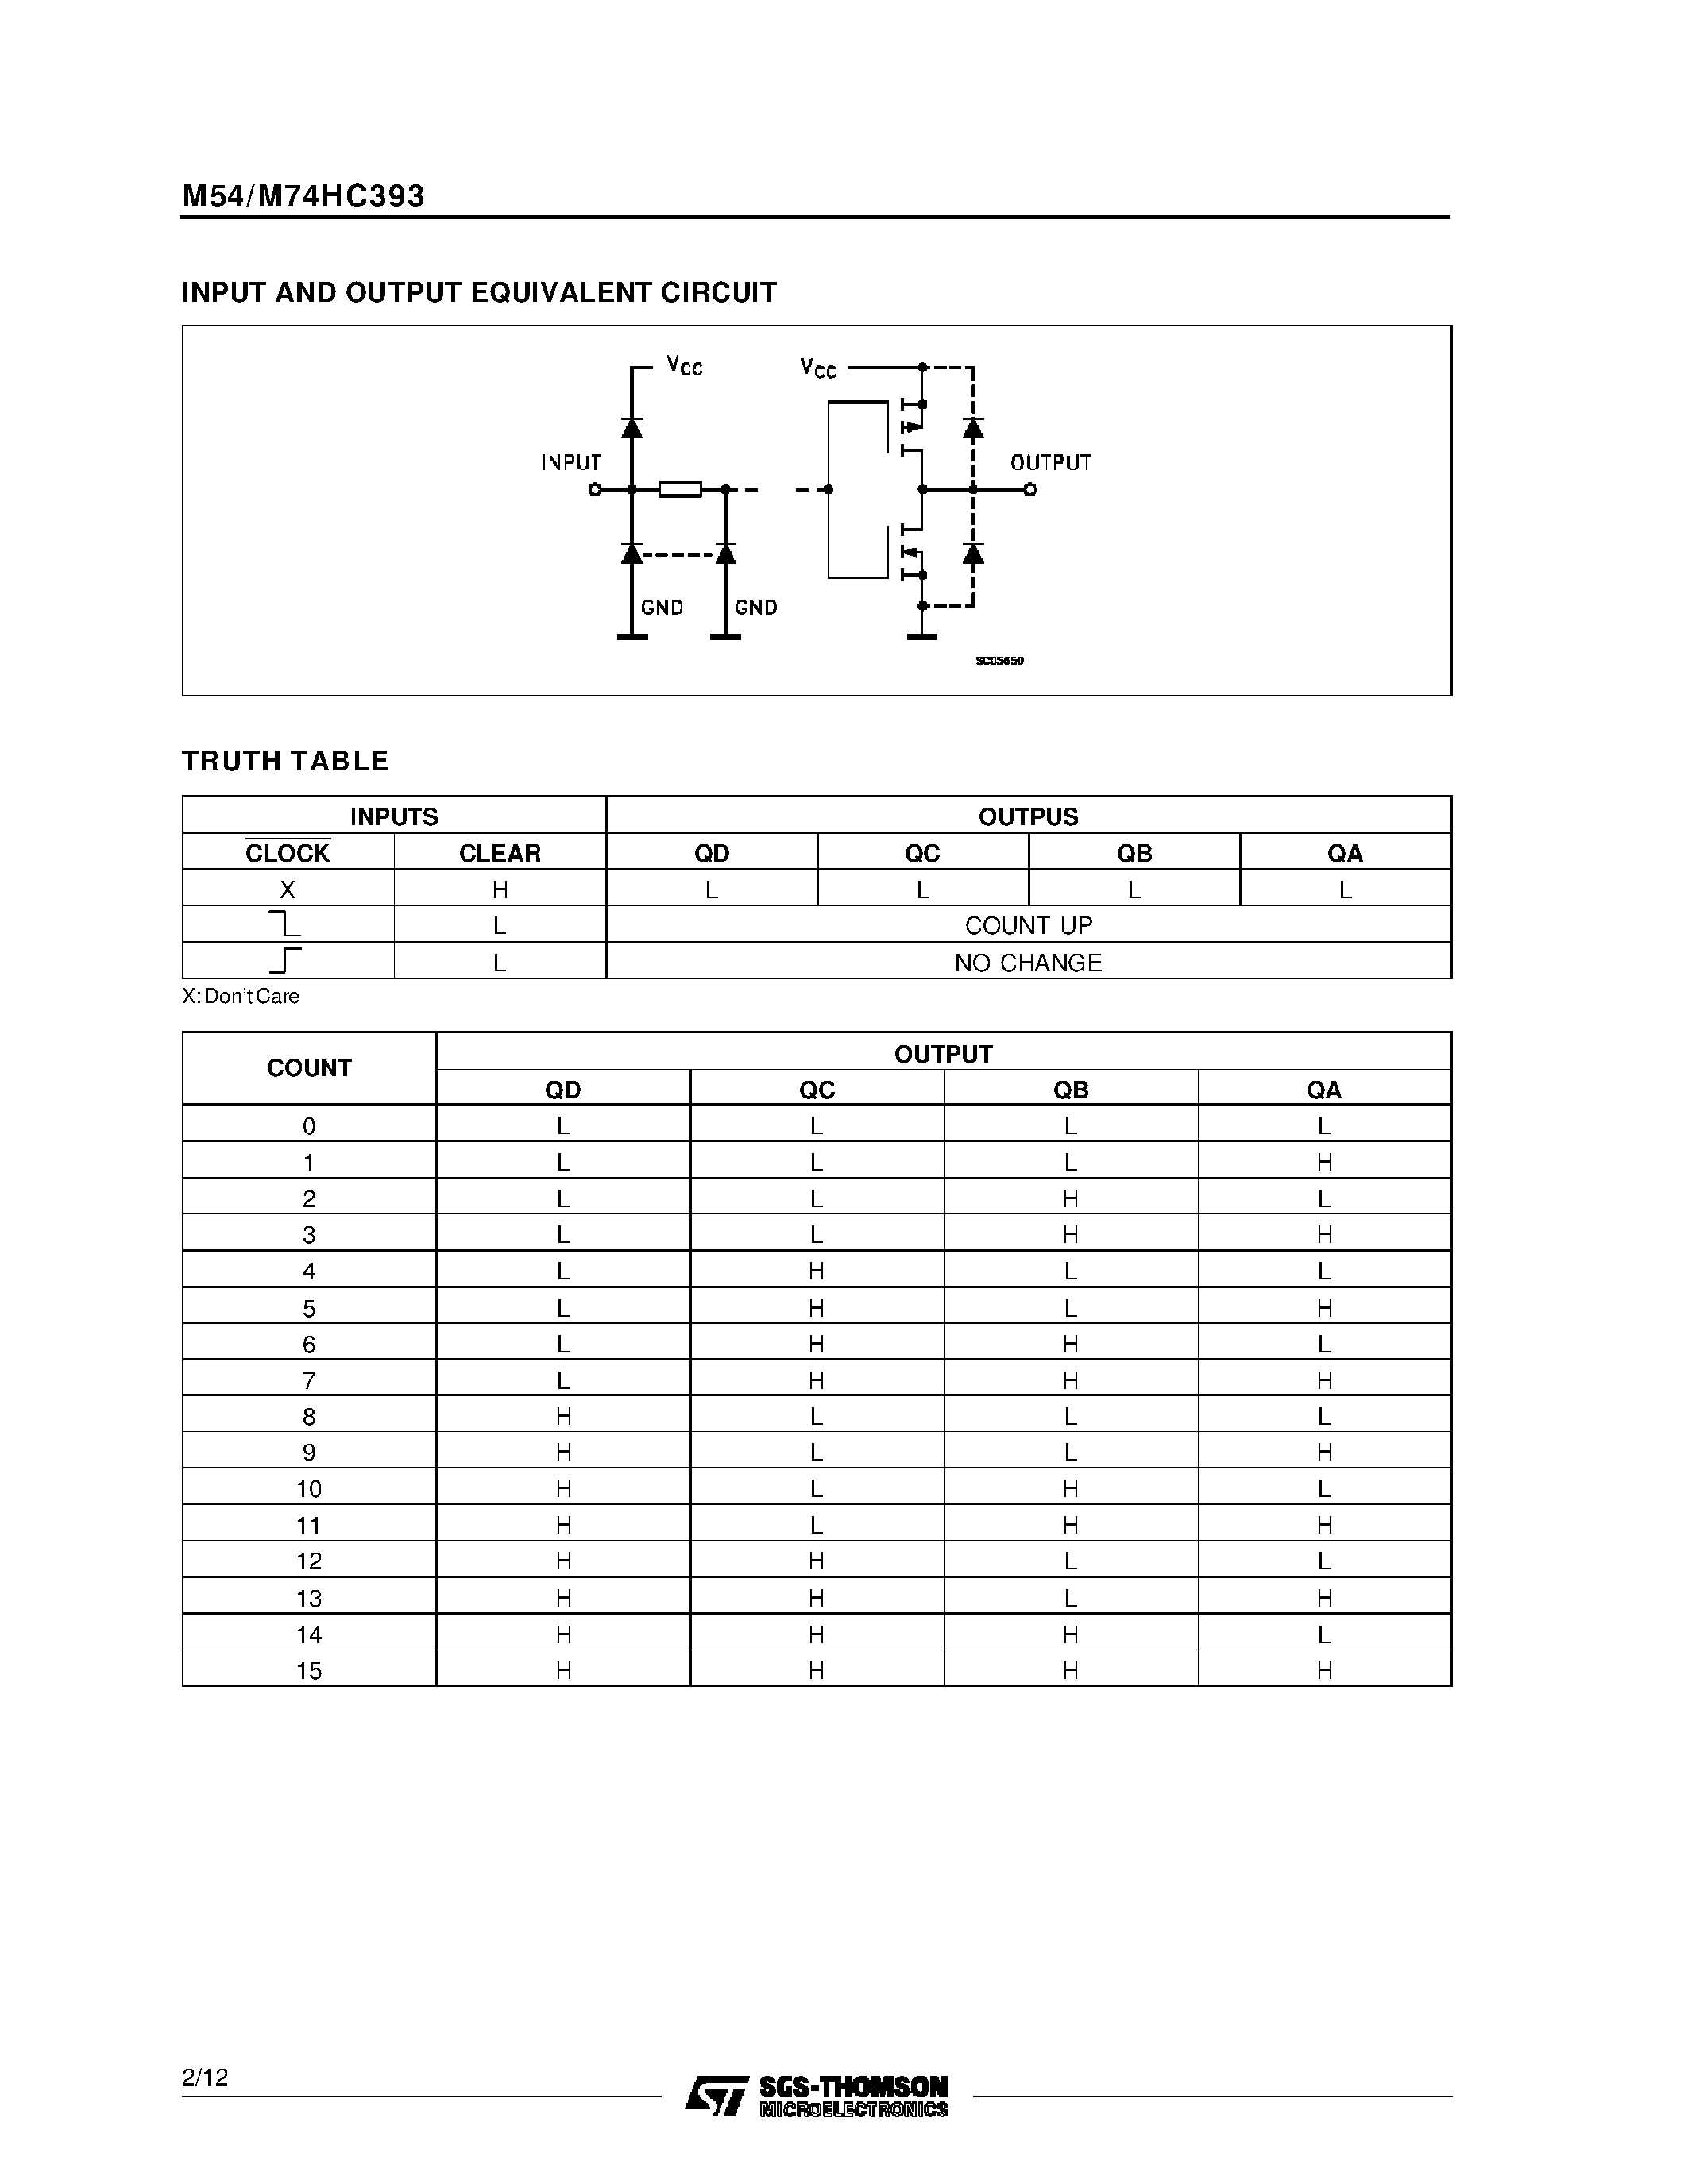 Datasheet M74HC393 - M54HC390F1R M74HC390M1R M74HC390B1R M74HC390C1R page 2